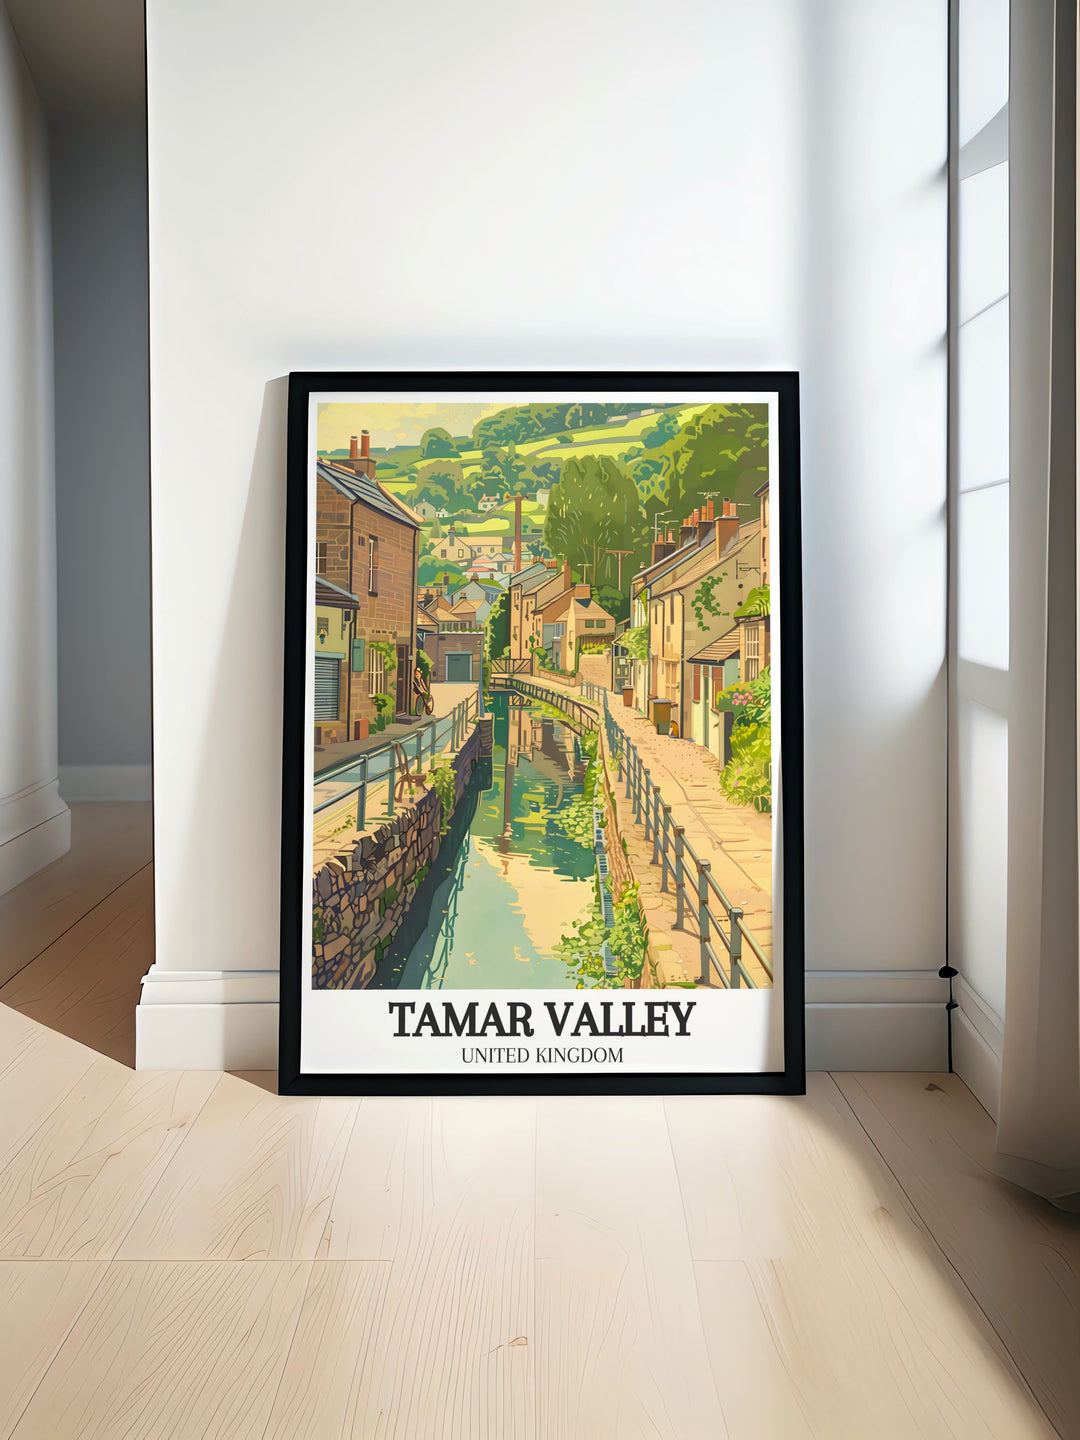 Experience the tranquility of Tavistock Canal River Tamar with this stunning vintage travel print. Perfect for adding a touch of elegance to your home decor, this print showcases the serene beauty of Tamar Valley AONB with vibrant colors and intricate details.